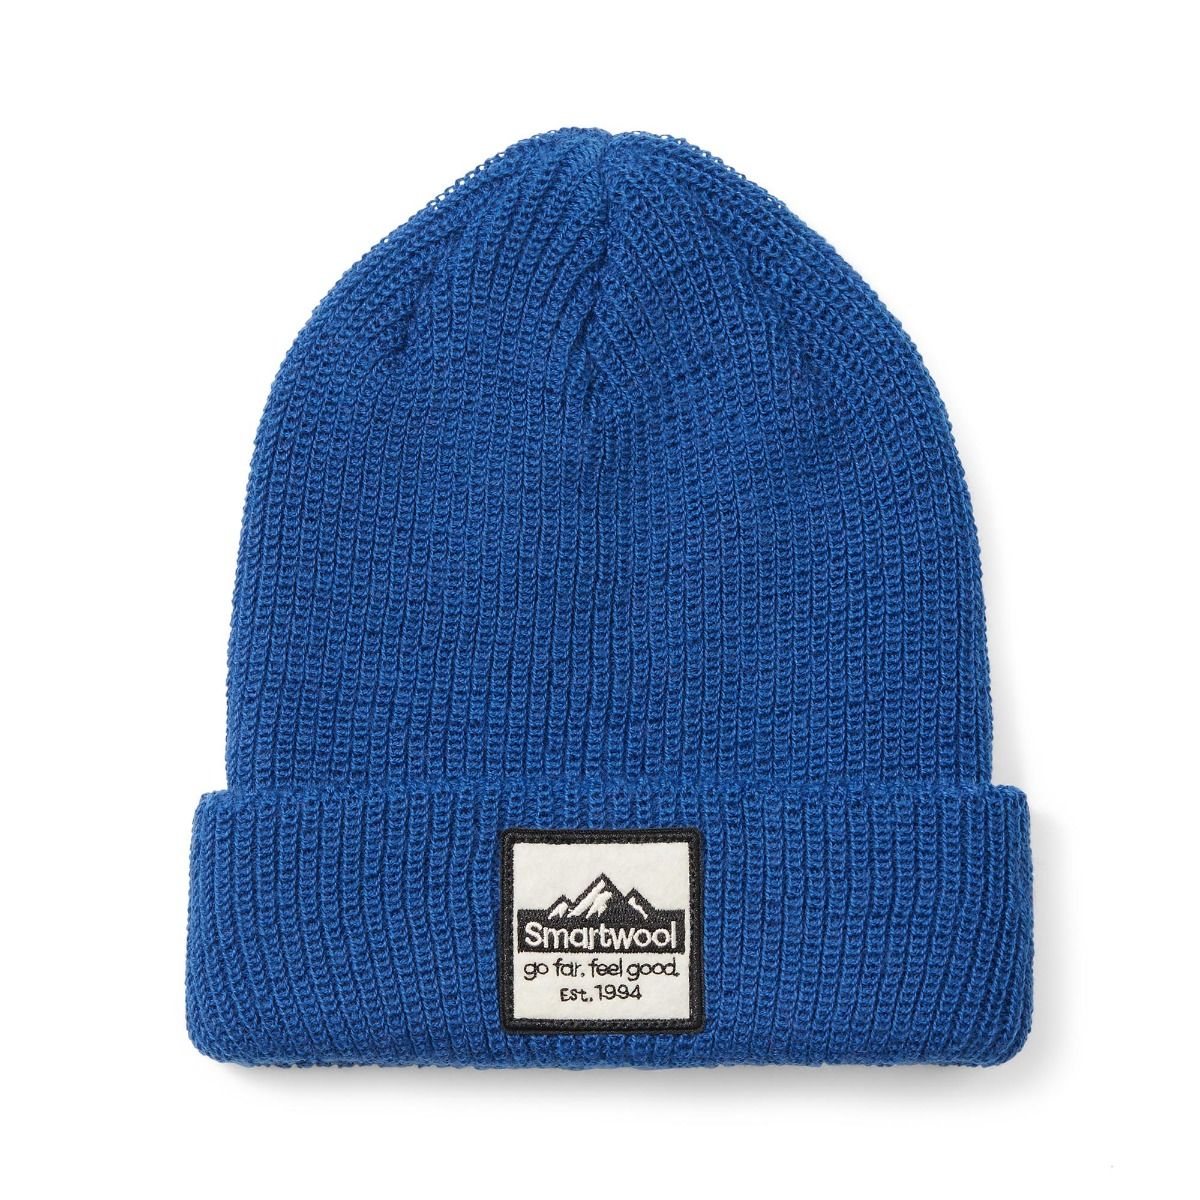 Kids' Smartwool Patch Beanie | Smartwool Canada